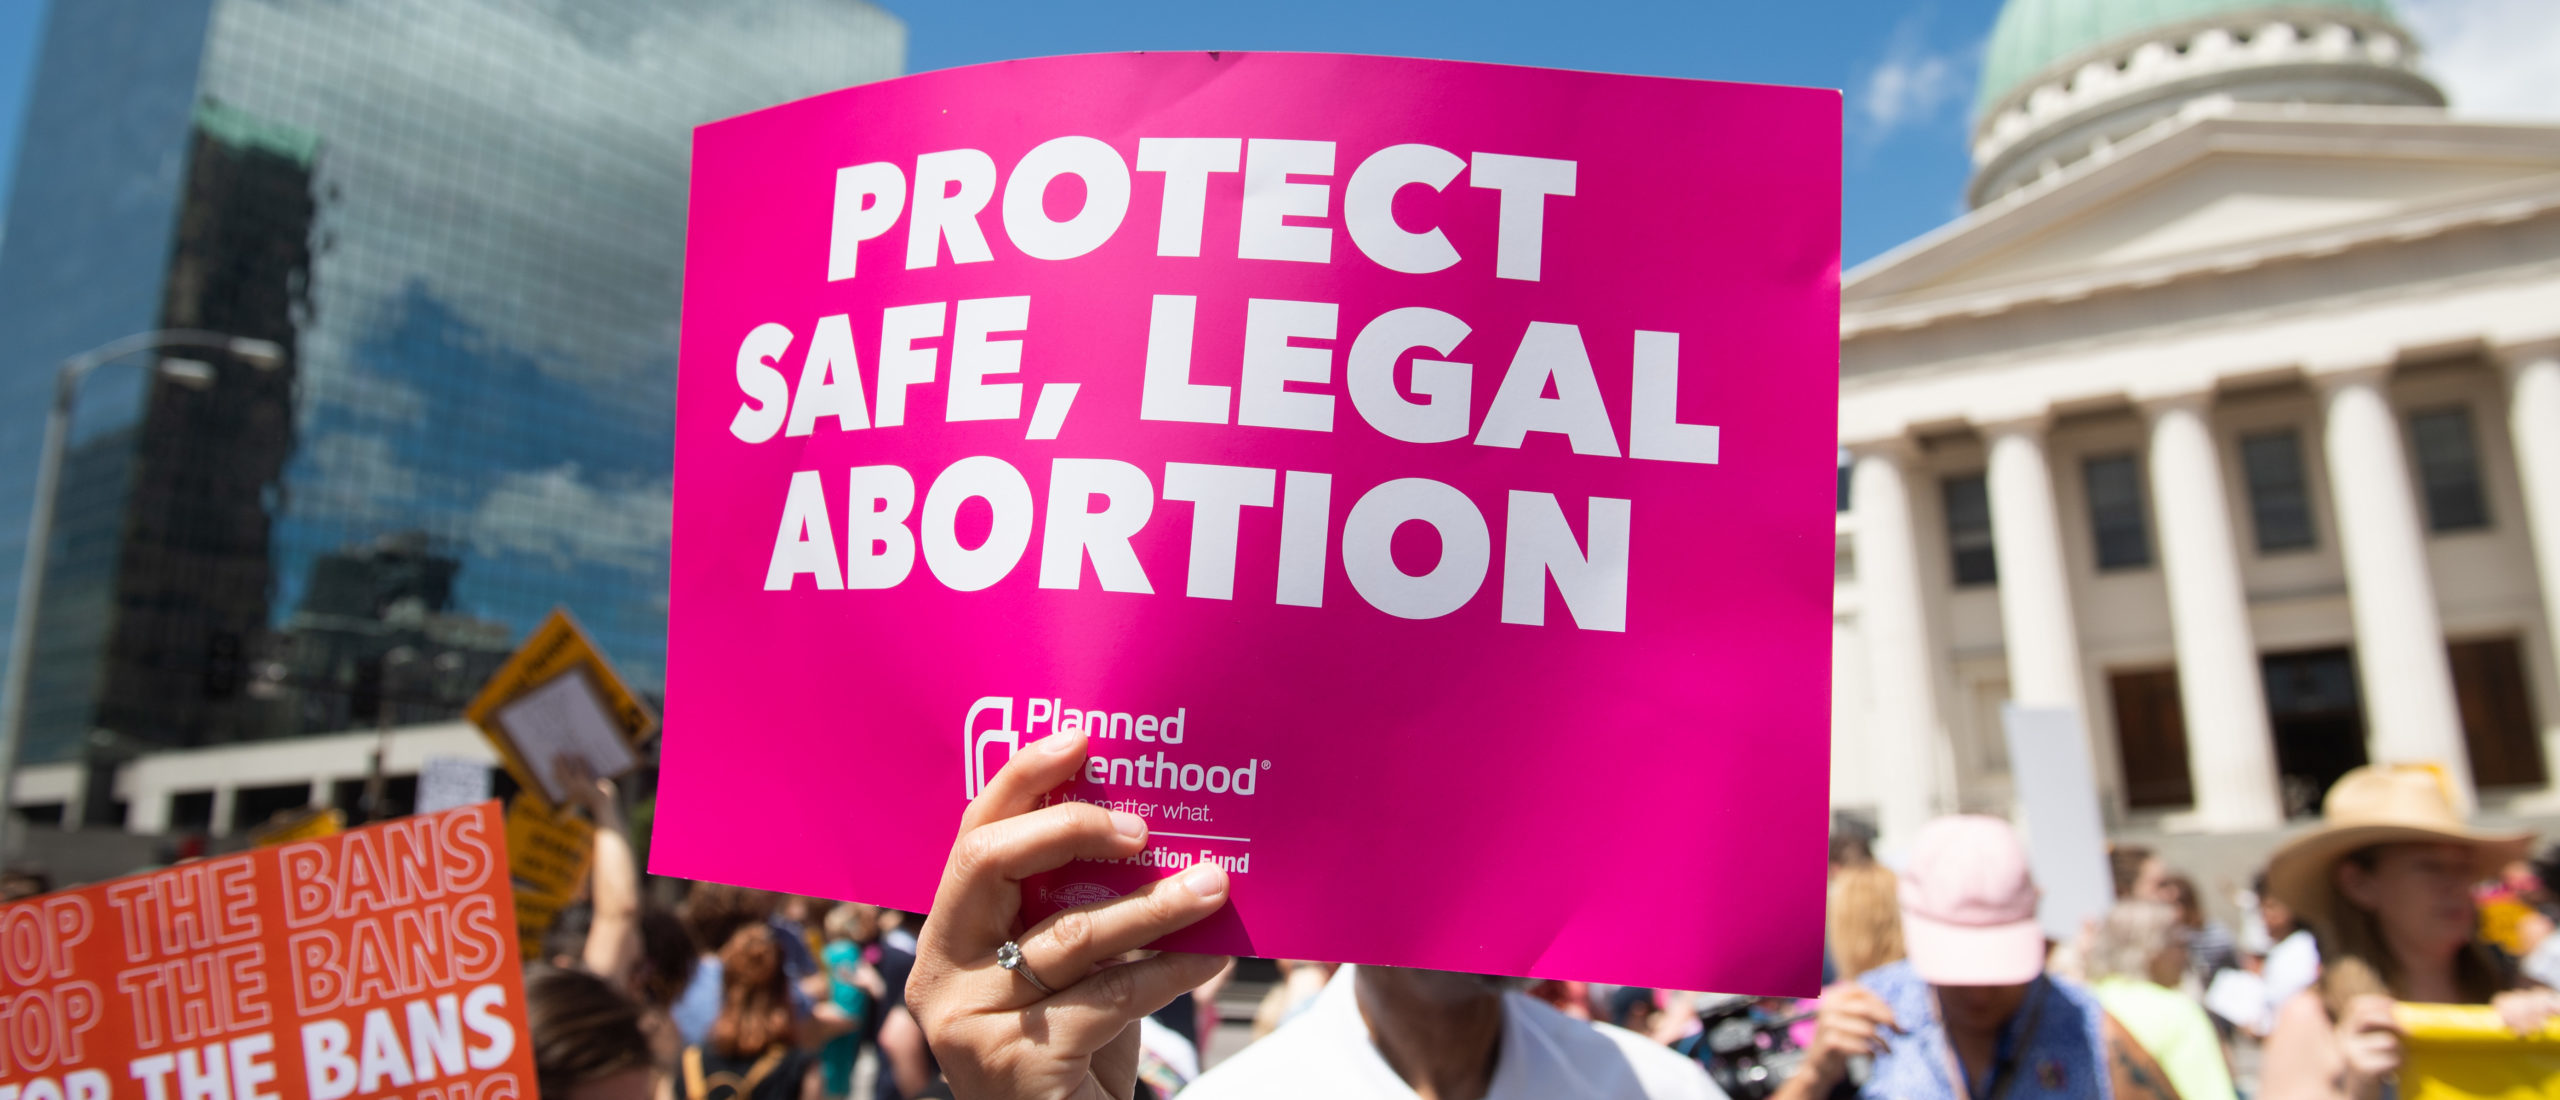 Protesters hold signs as they rally in support of Planned Parenthood and pro-choice and to protest a state decision that would effectively halt abortions by revoking the center's license to perform the procedure, near the Old Courthouse in St. Louis, Missouri, May 30, 2019. (Photo by SAUL LOEB / AFP via Getty Images)